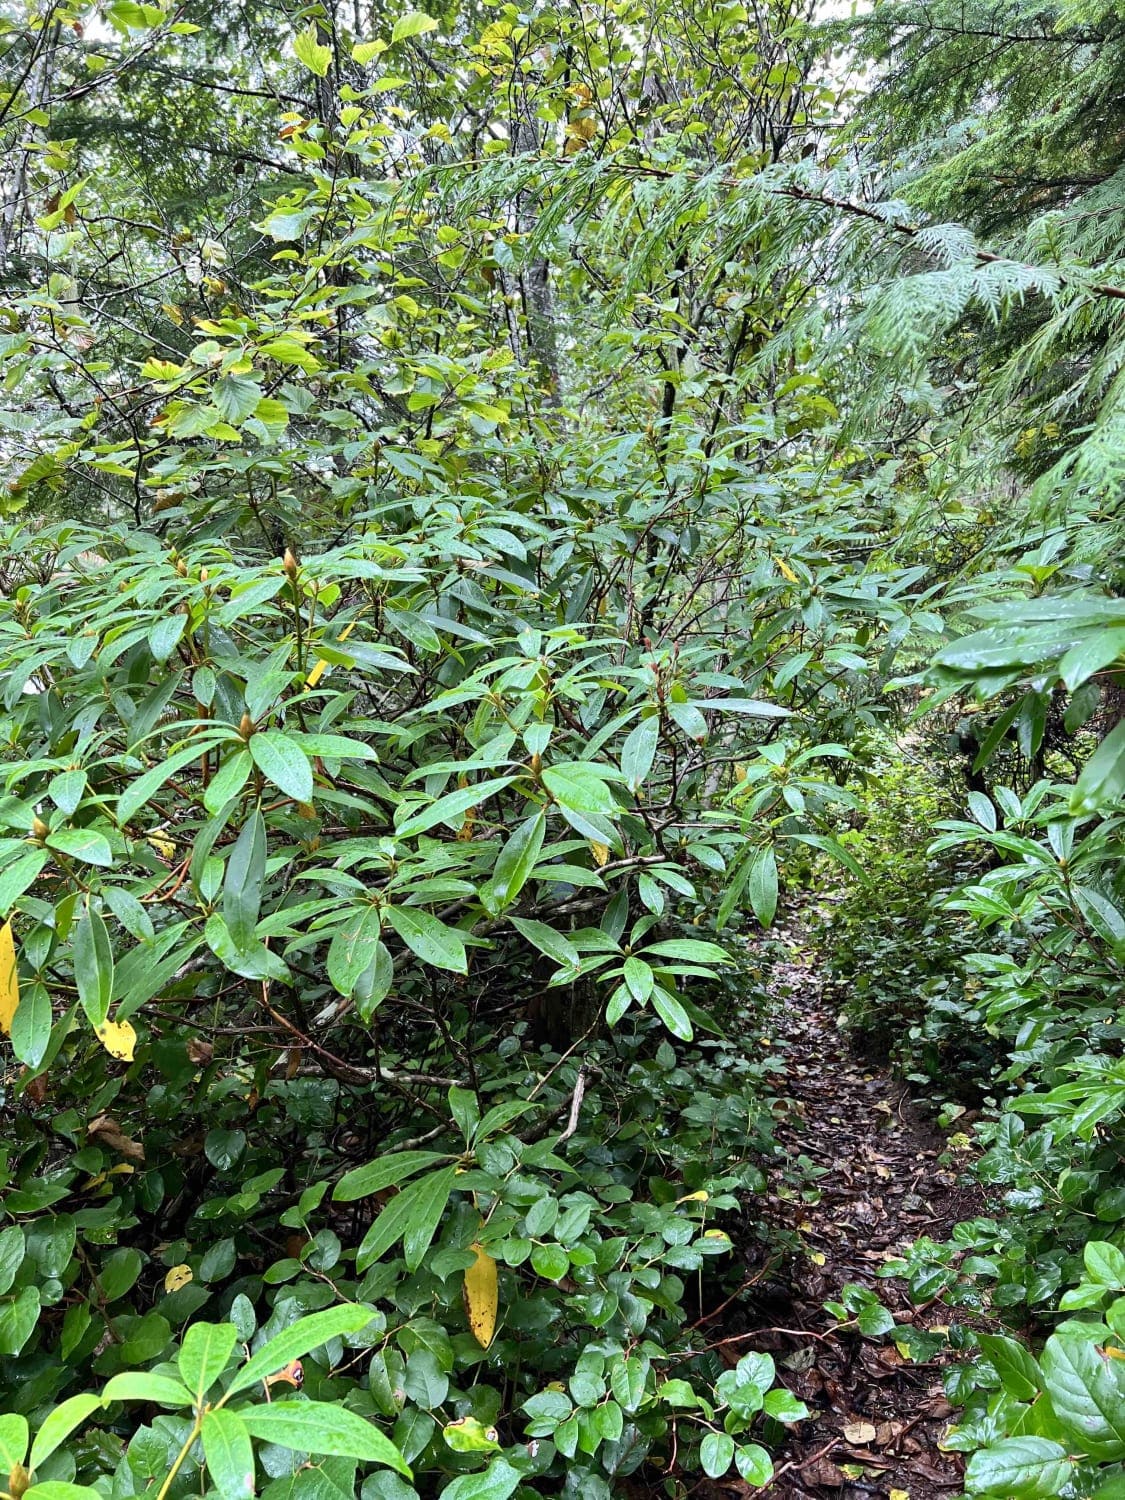 Rhododendron Lake Ecological Site